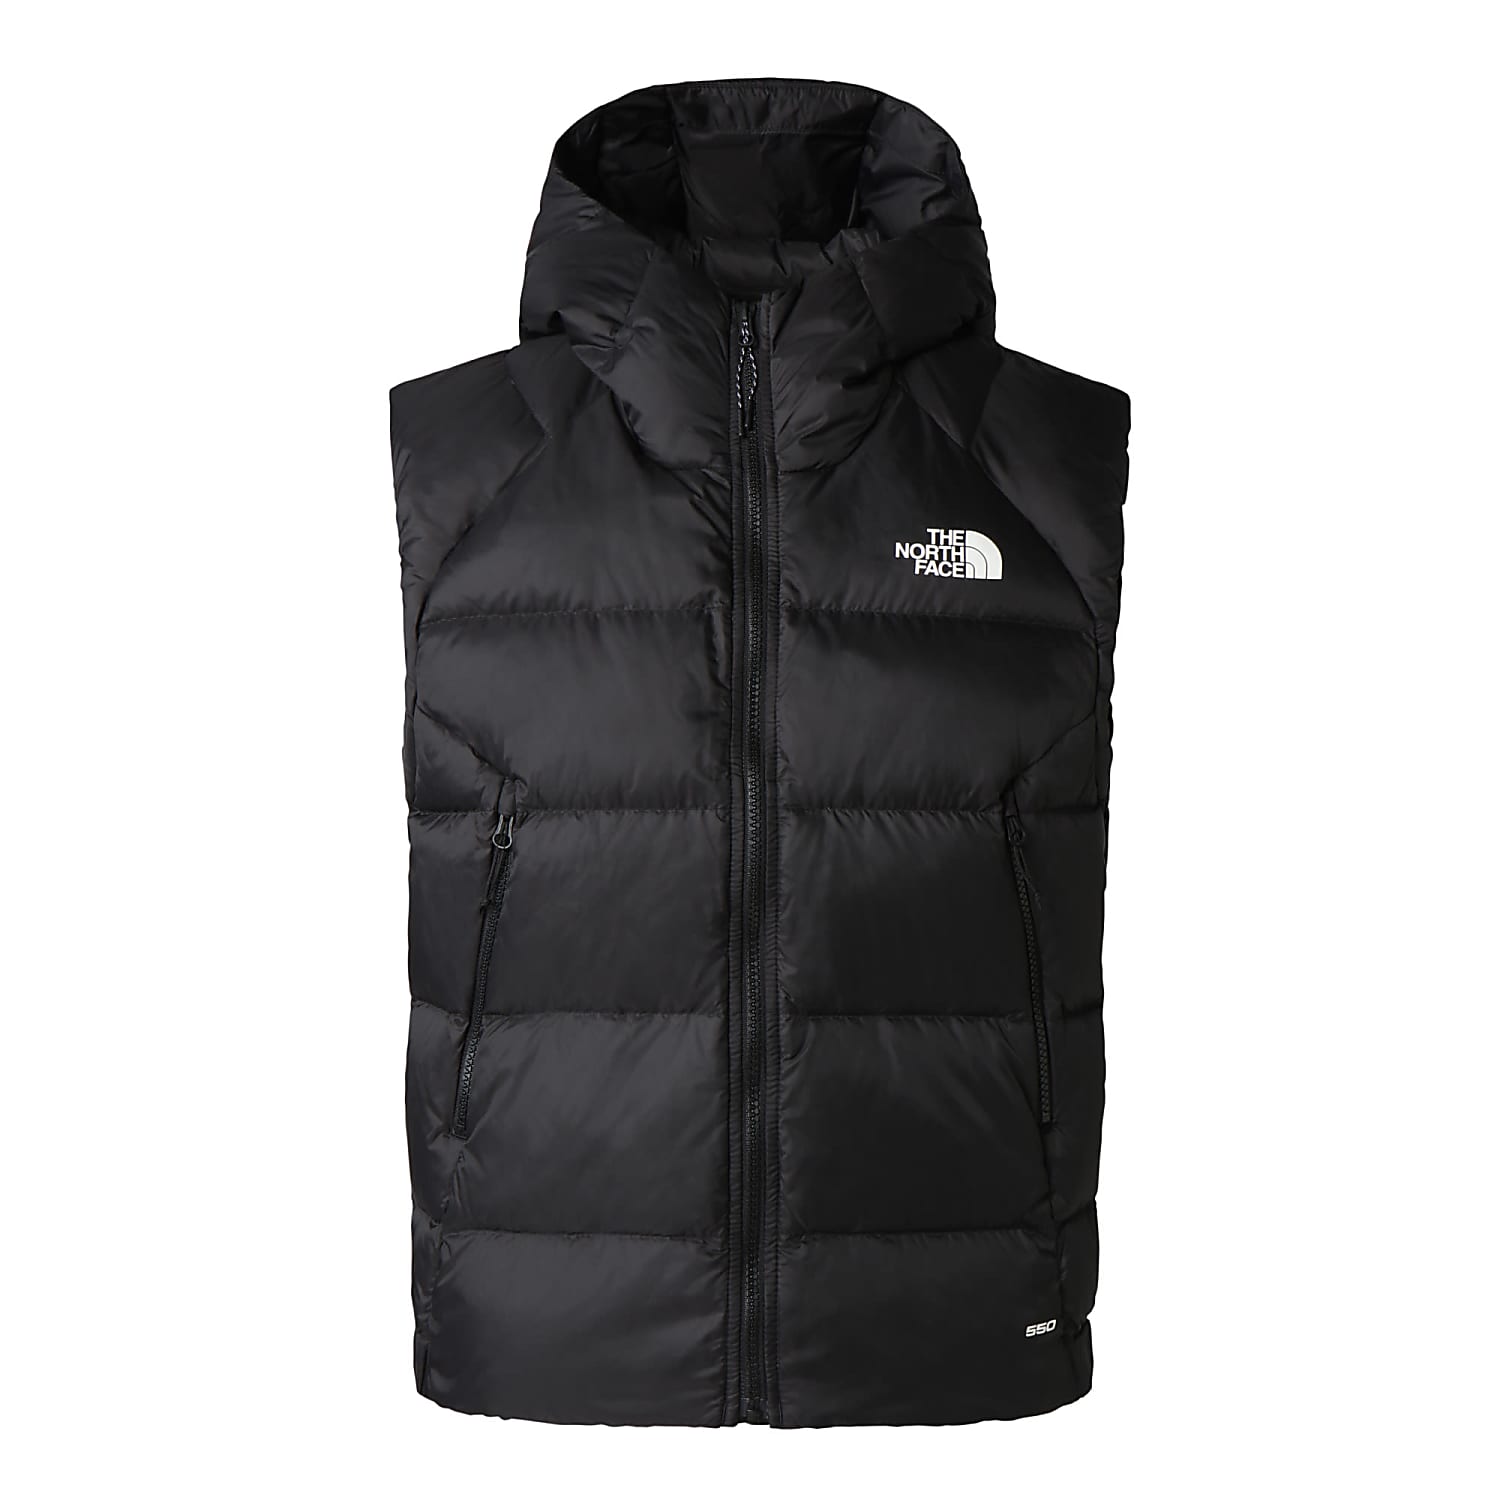 The North Face W Fast Black cheap HYALITE TNF shipping - VEST, and